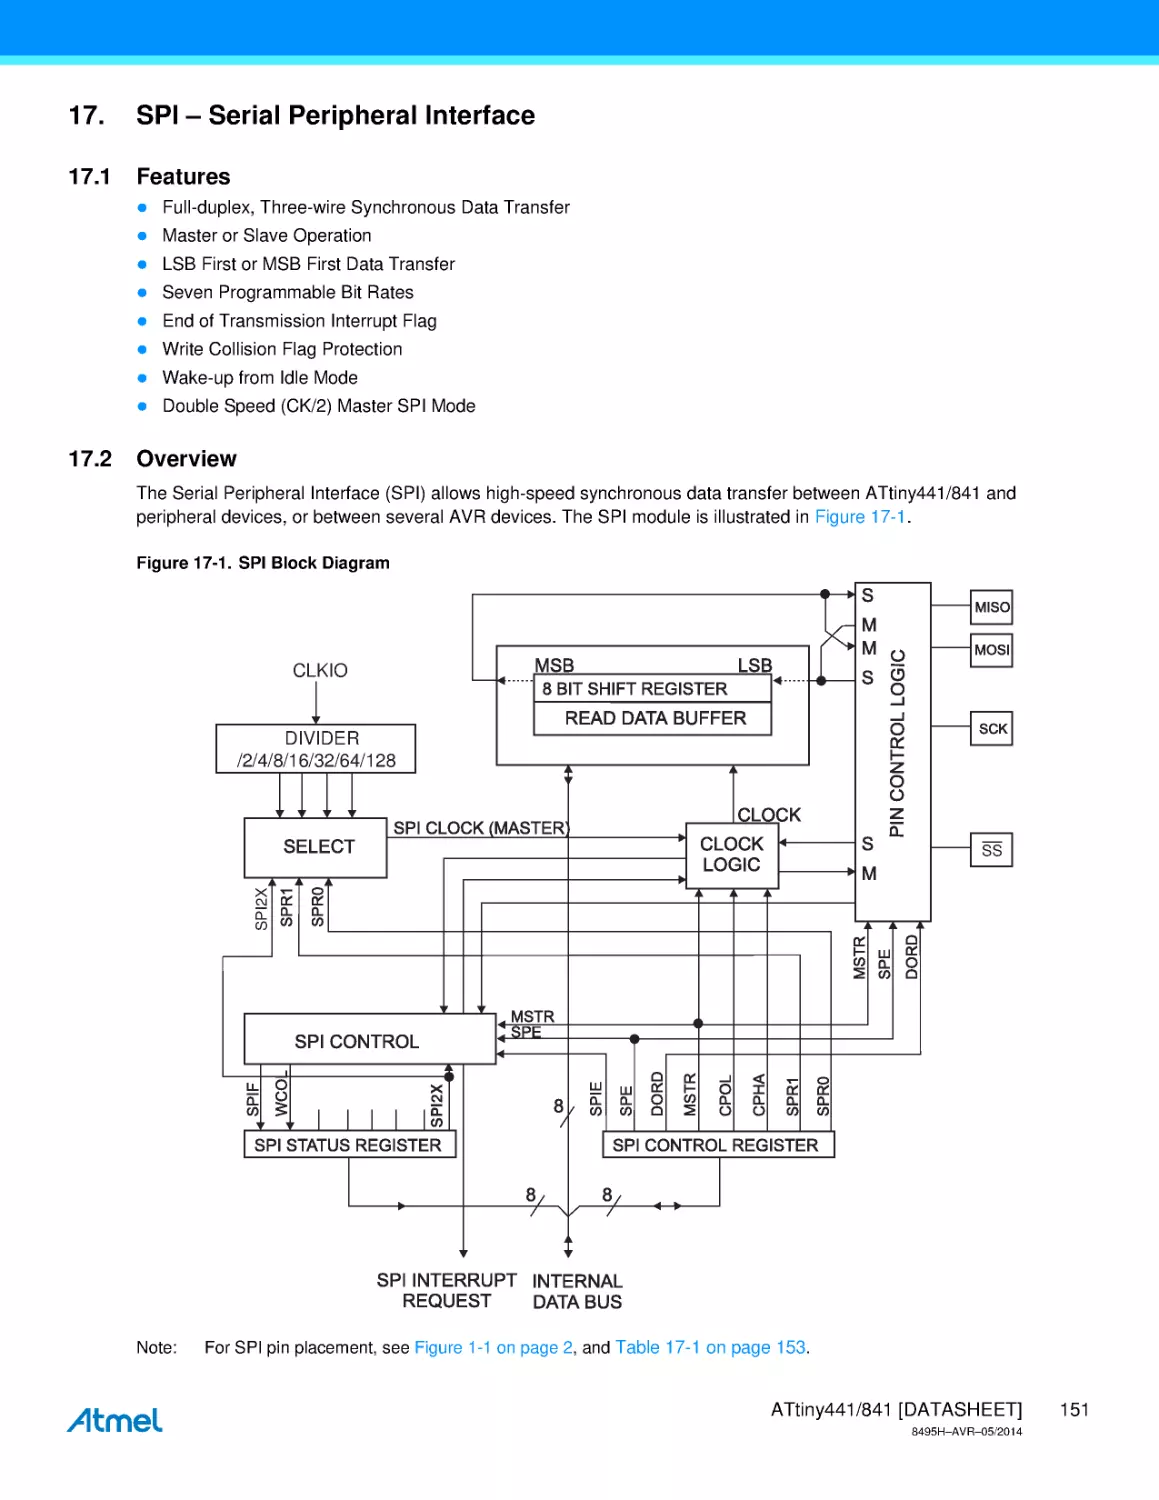 17. SPI – Serial Peripheral Interface
17.1 Features
17.2 Overview